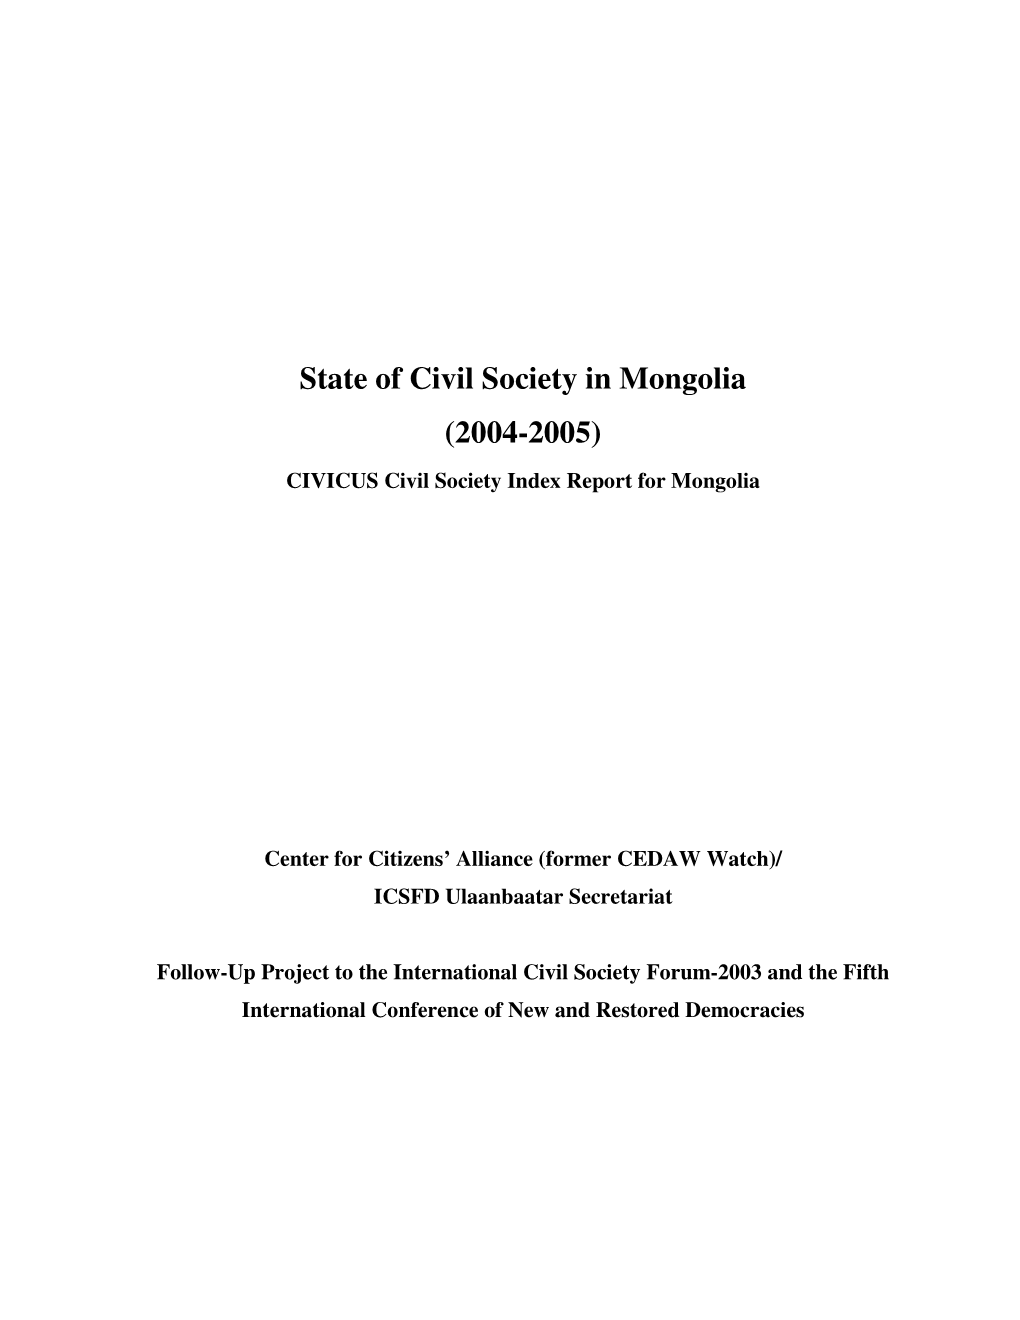 State of Civil Society in Mongolia (2004-2005) CIVICUS Civil Society Index Report for Mongolia